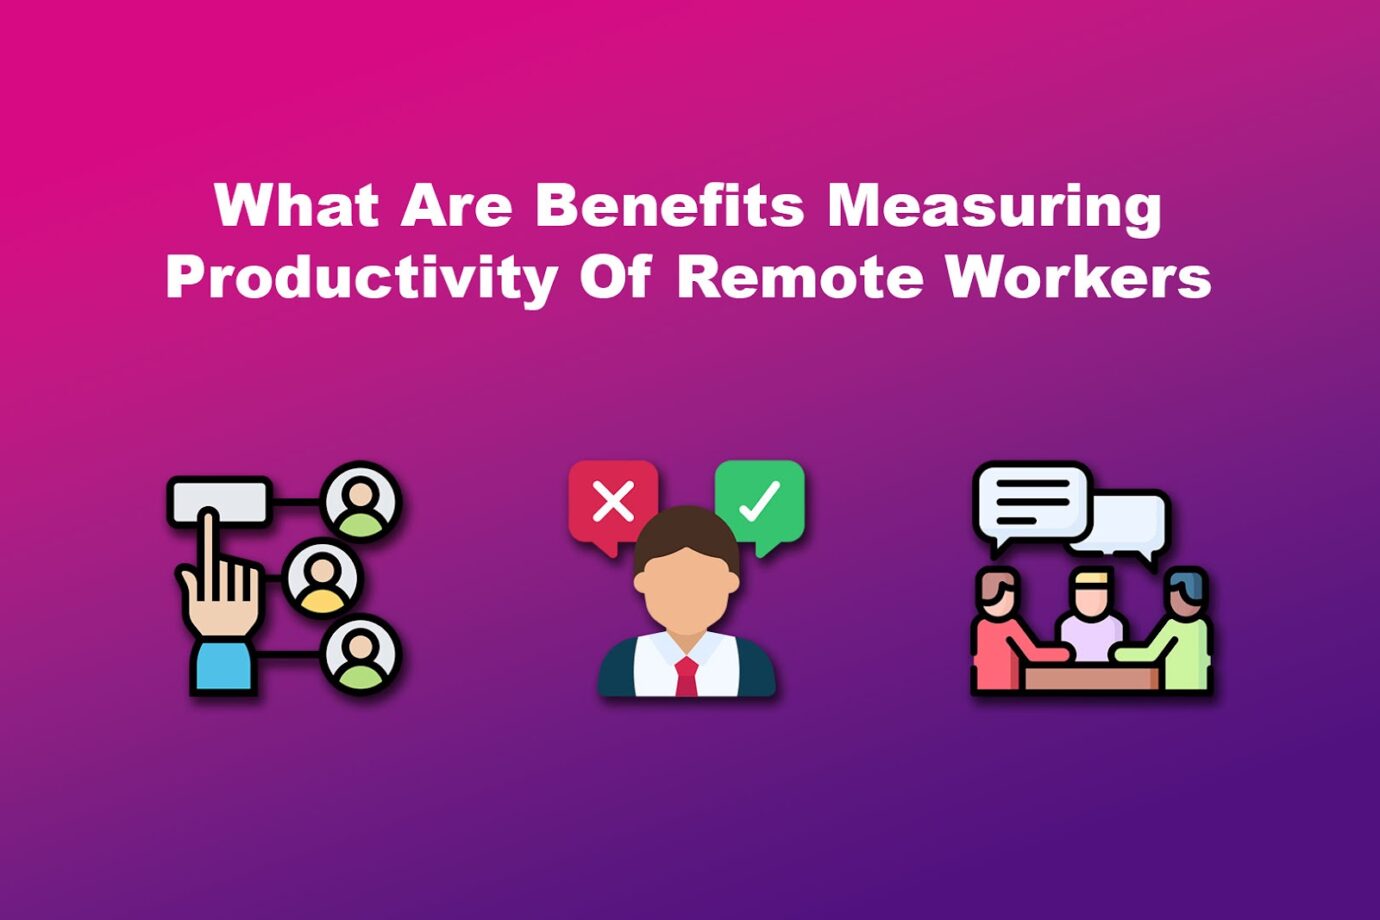 What Are Benefits Measuring Productivity Of Remote Workers